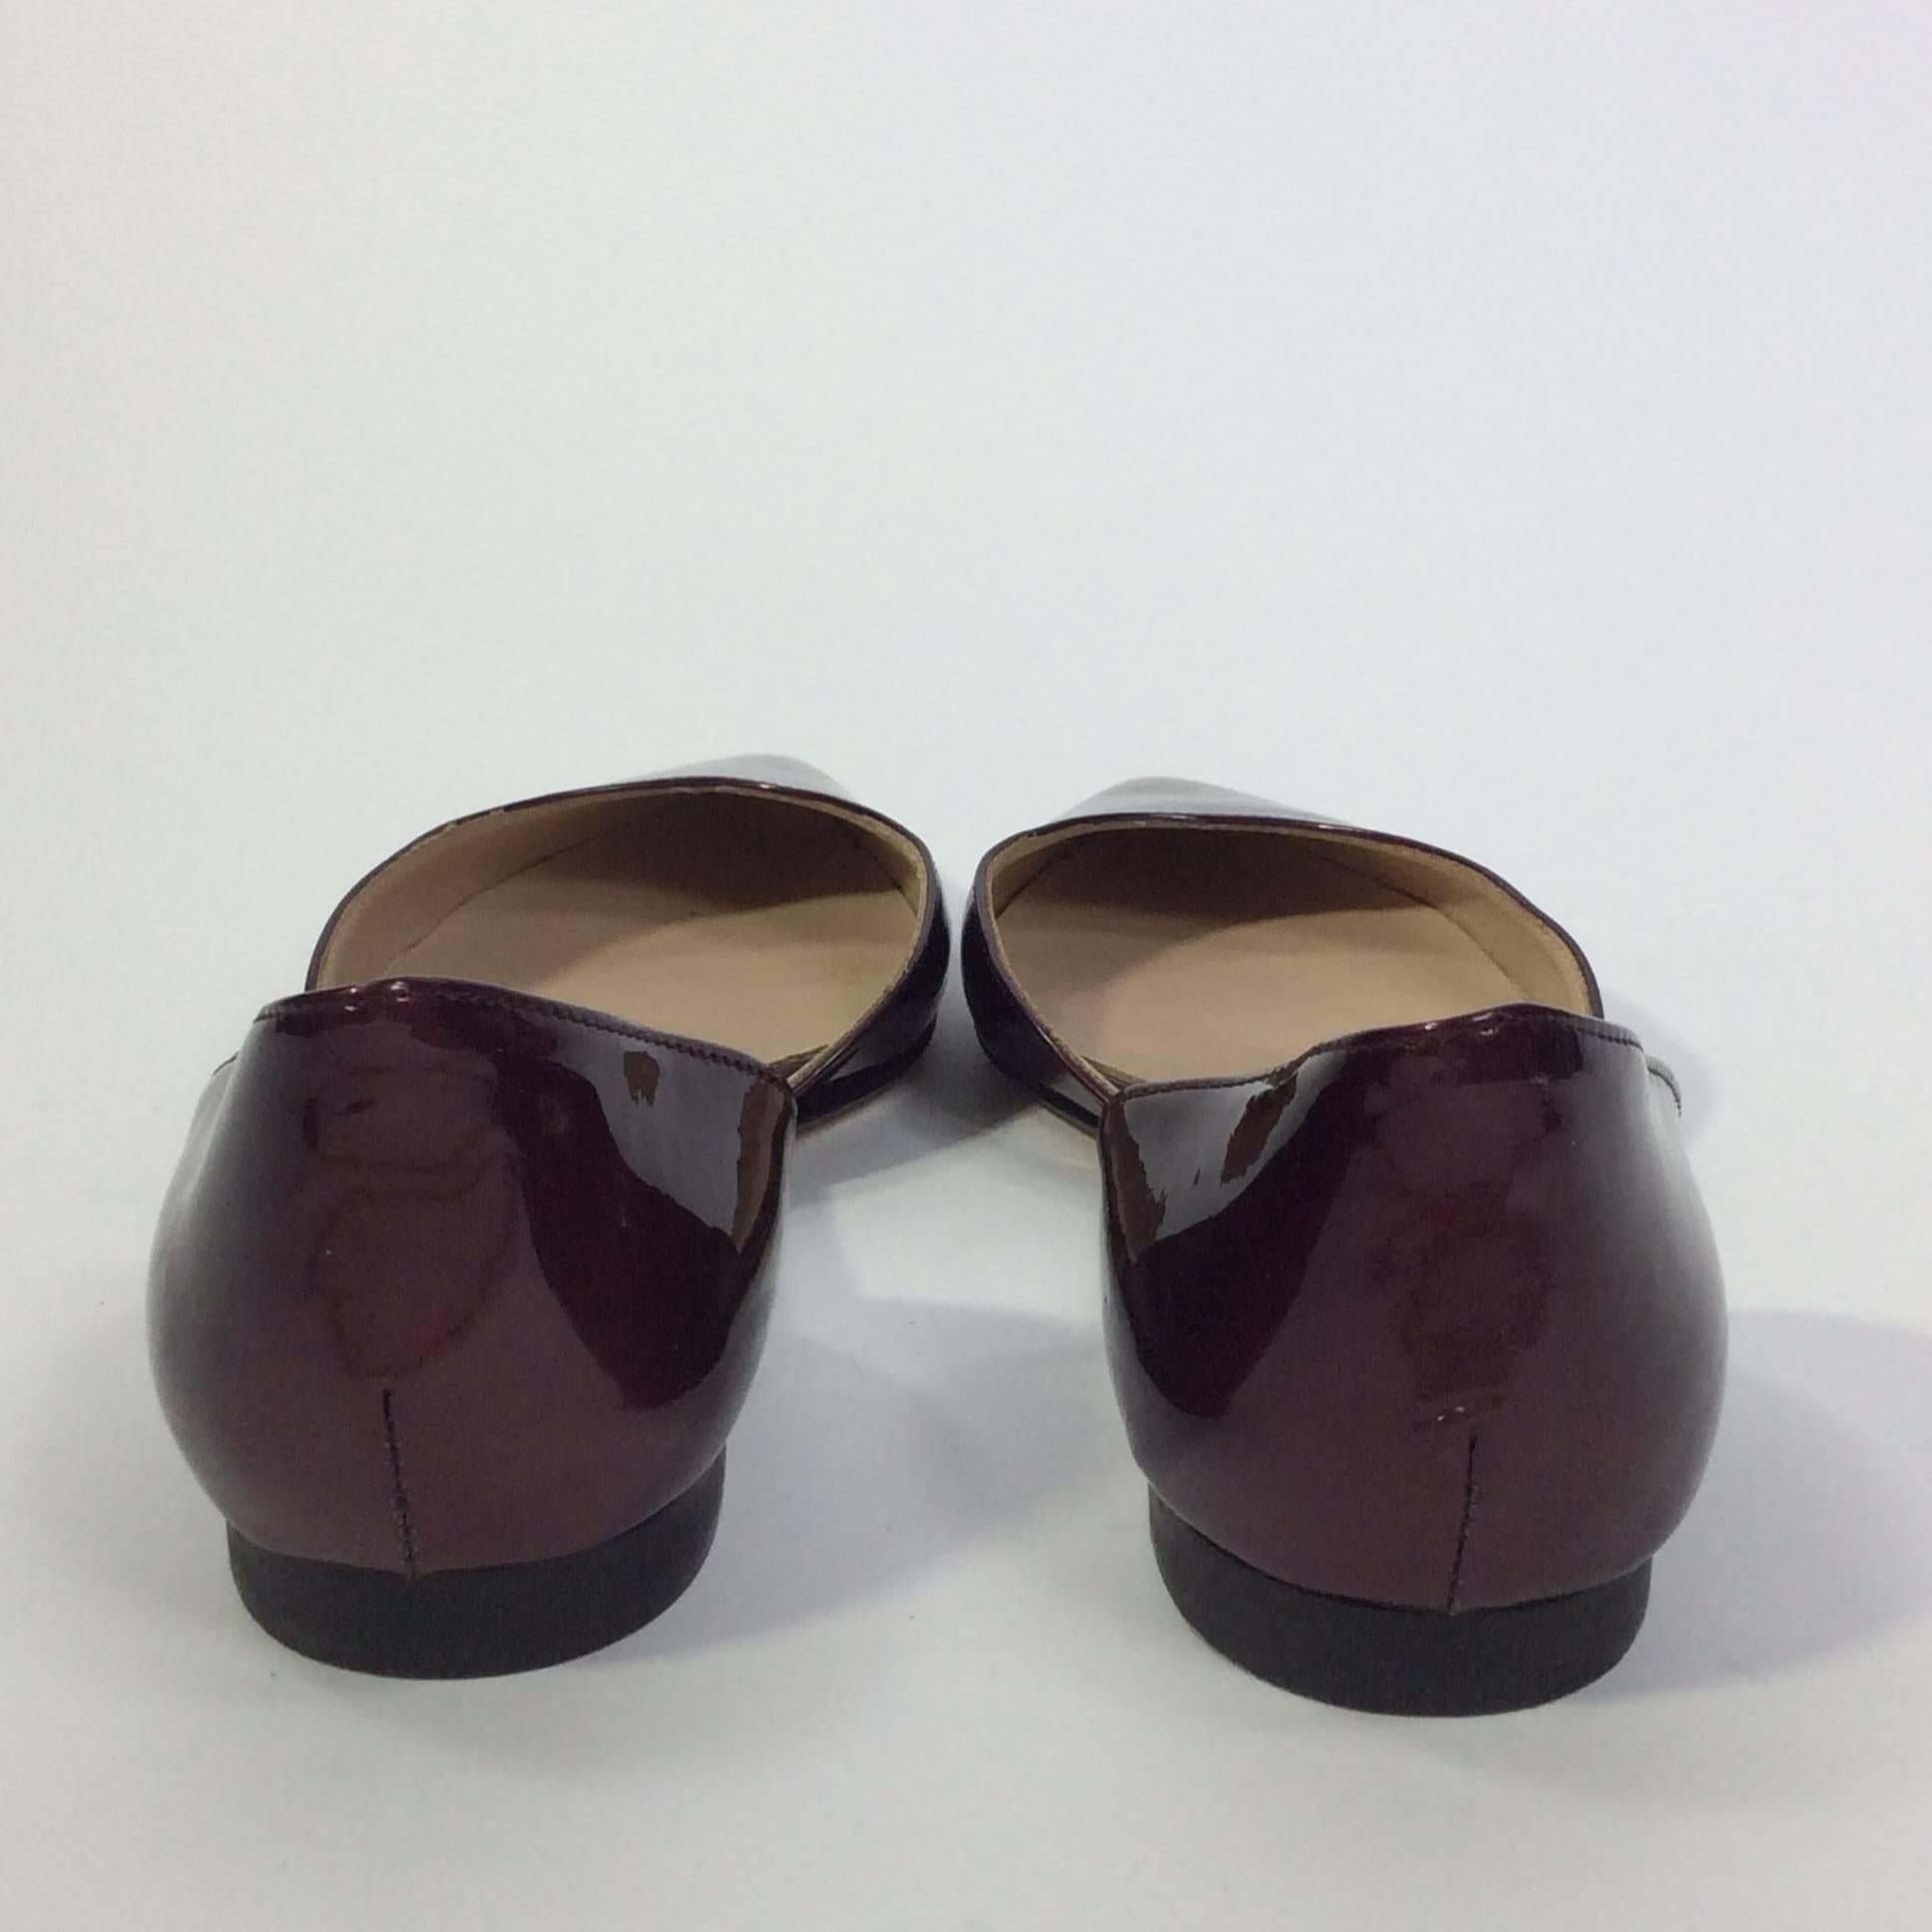 Manolo Blahnik Maroon Patent Pointed Toe Ballet Flats In Excellent Condition For Sale In Narberth, PA